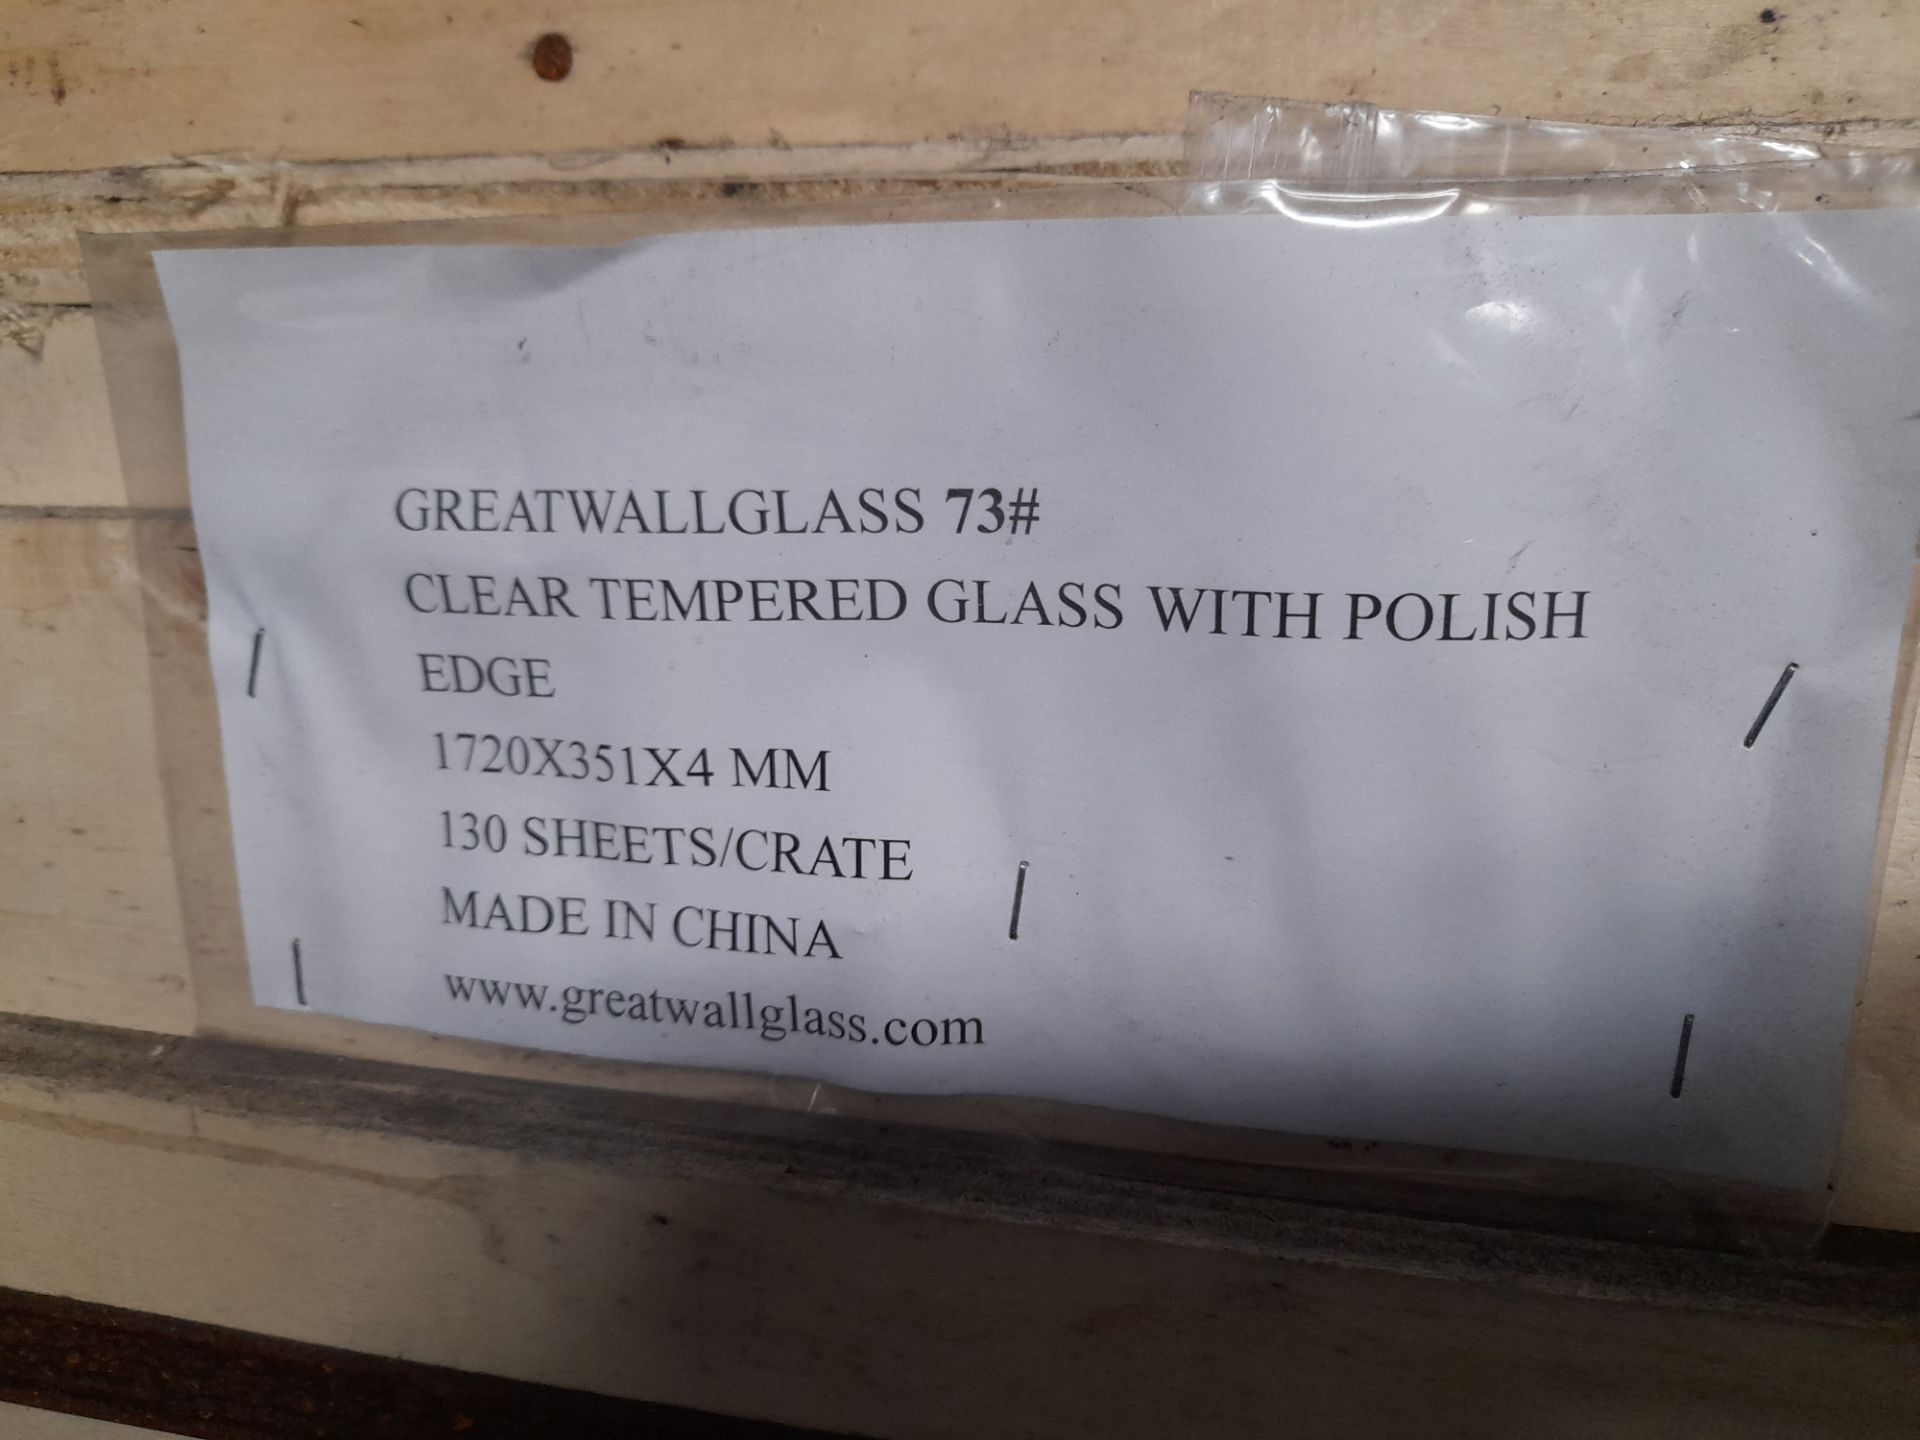 10 x crates clear tempered glass with polish edge - Image 2 of 2